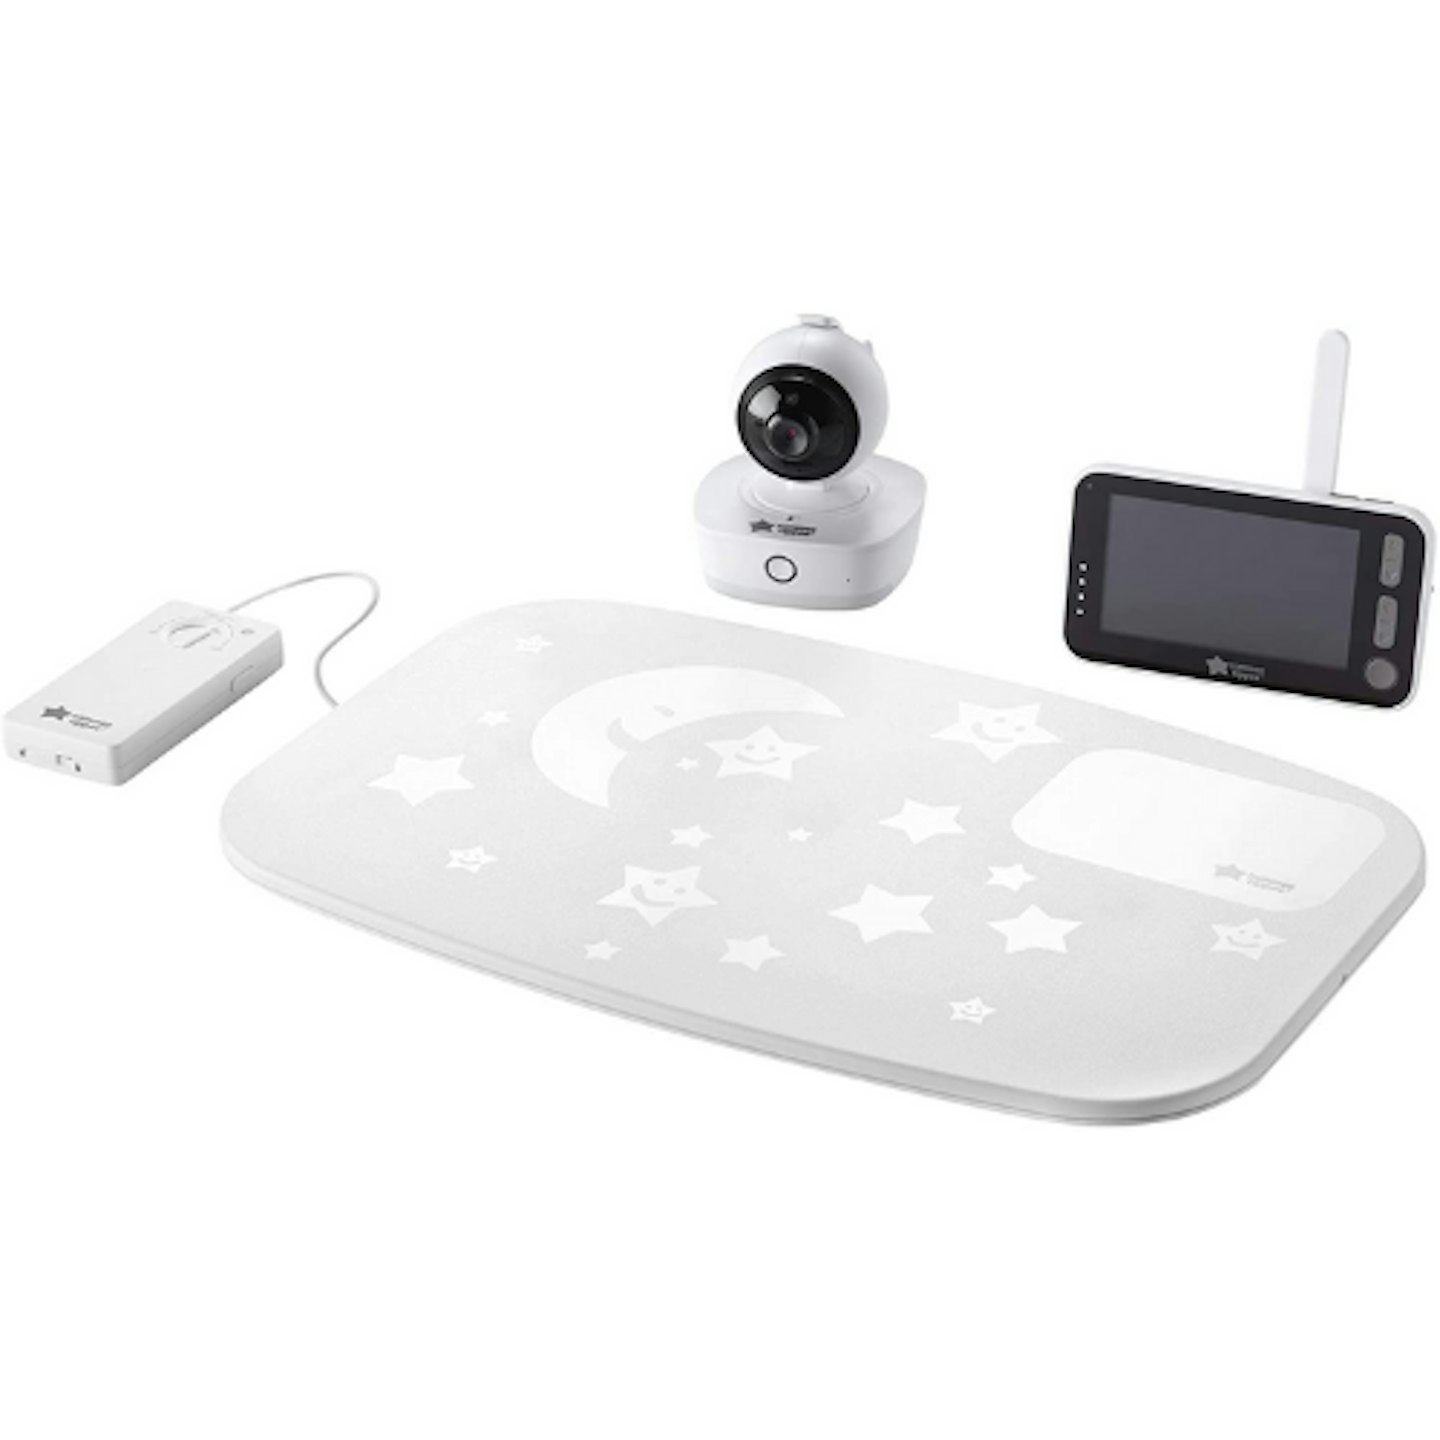 Tommee Tippee Dreamee Video Baby Monitor